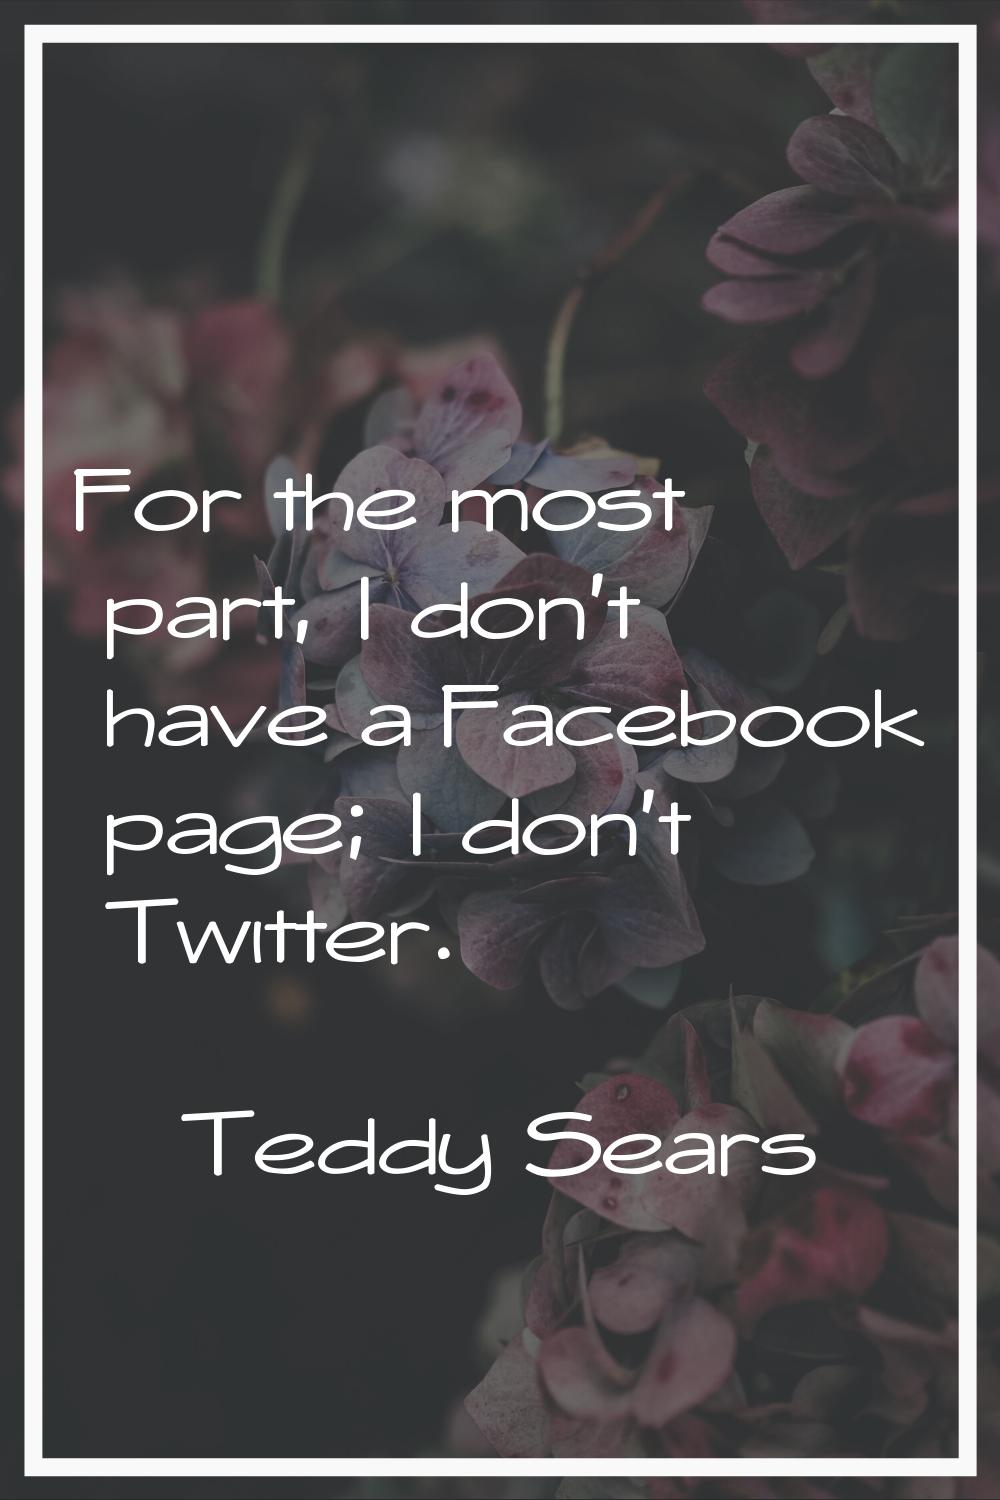 For the most part, I don't have a Facebook page; I don't Twitter.